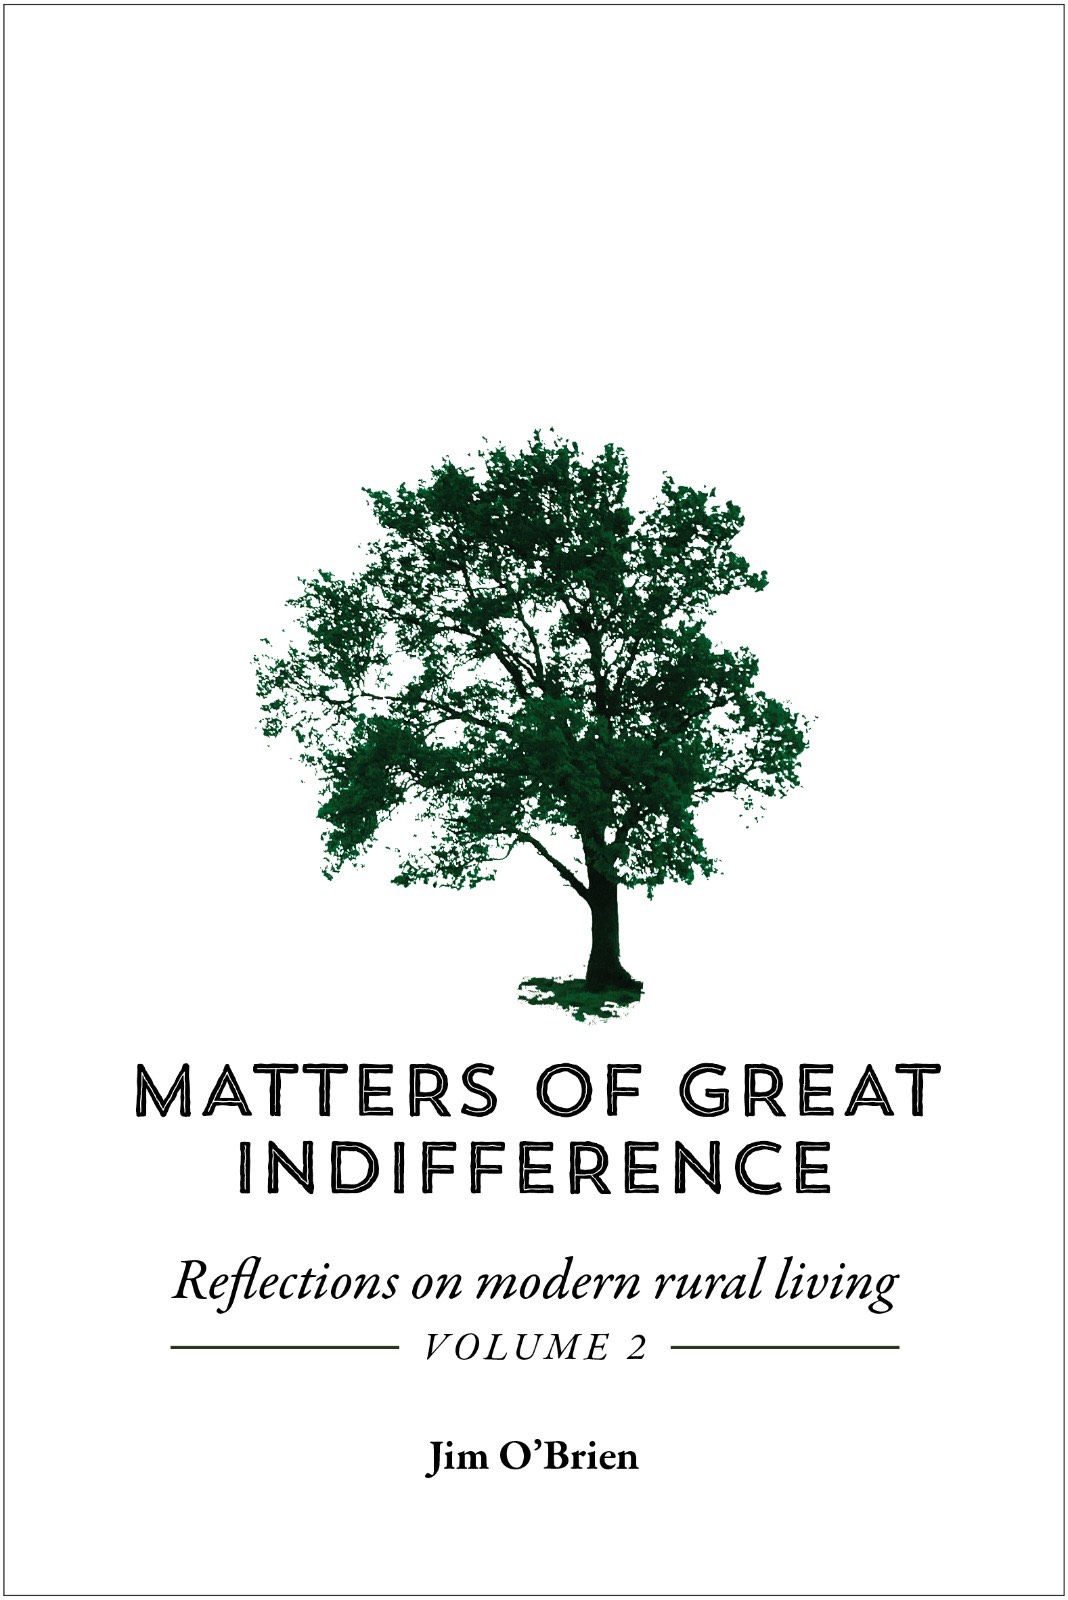 Press release A Laois launch for Matters of Great Indifference Volume 2